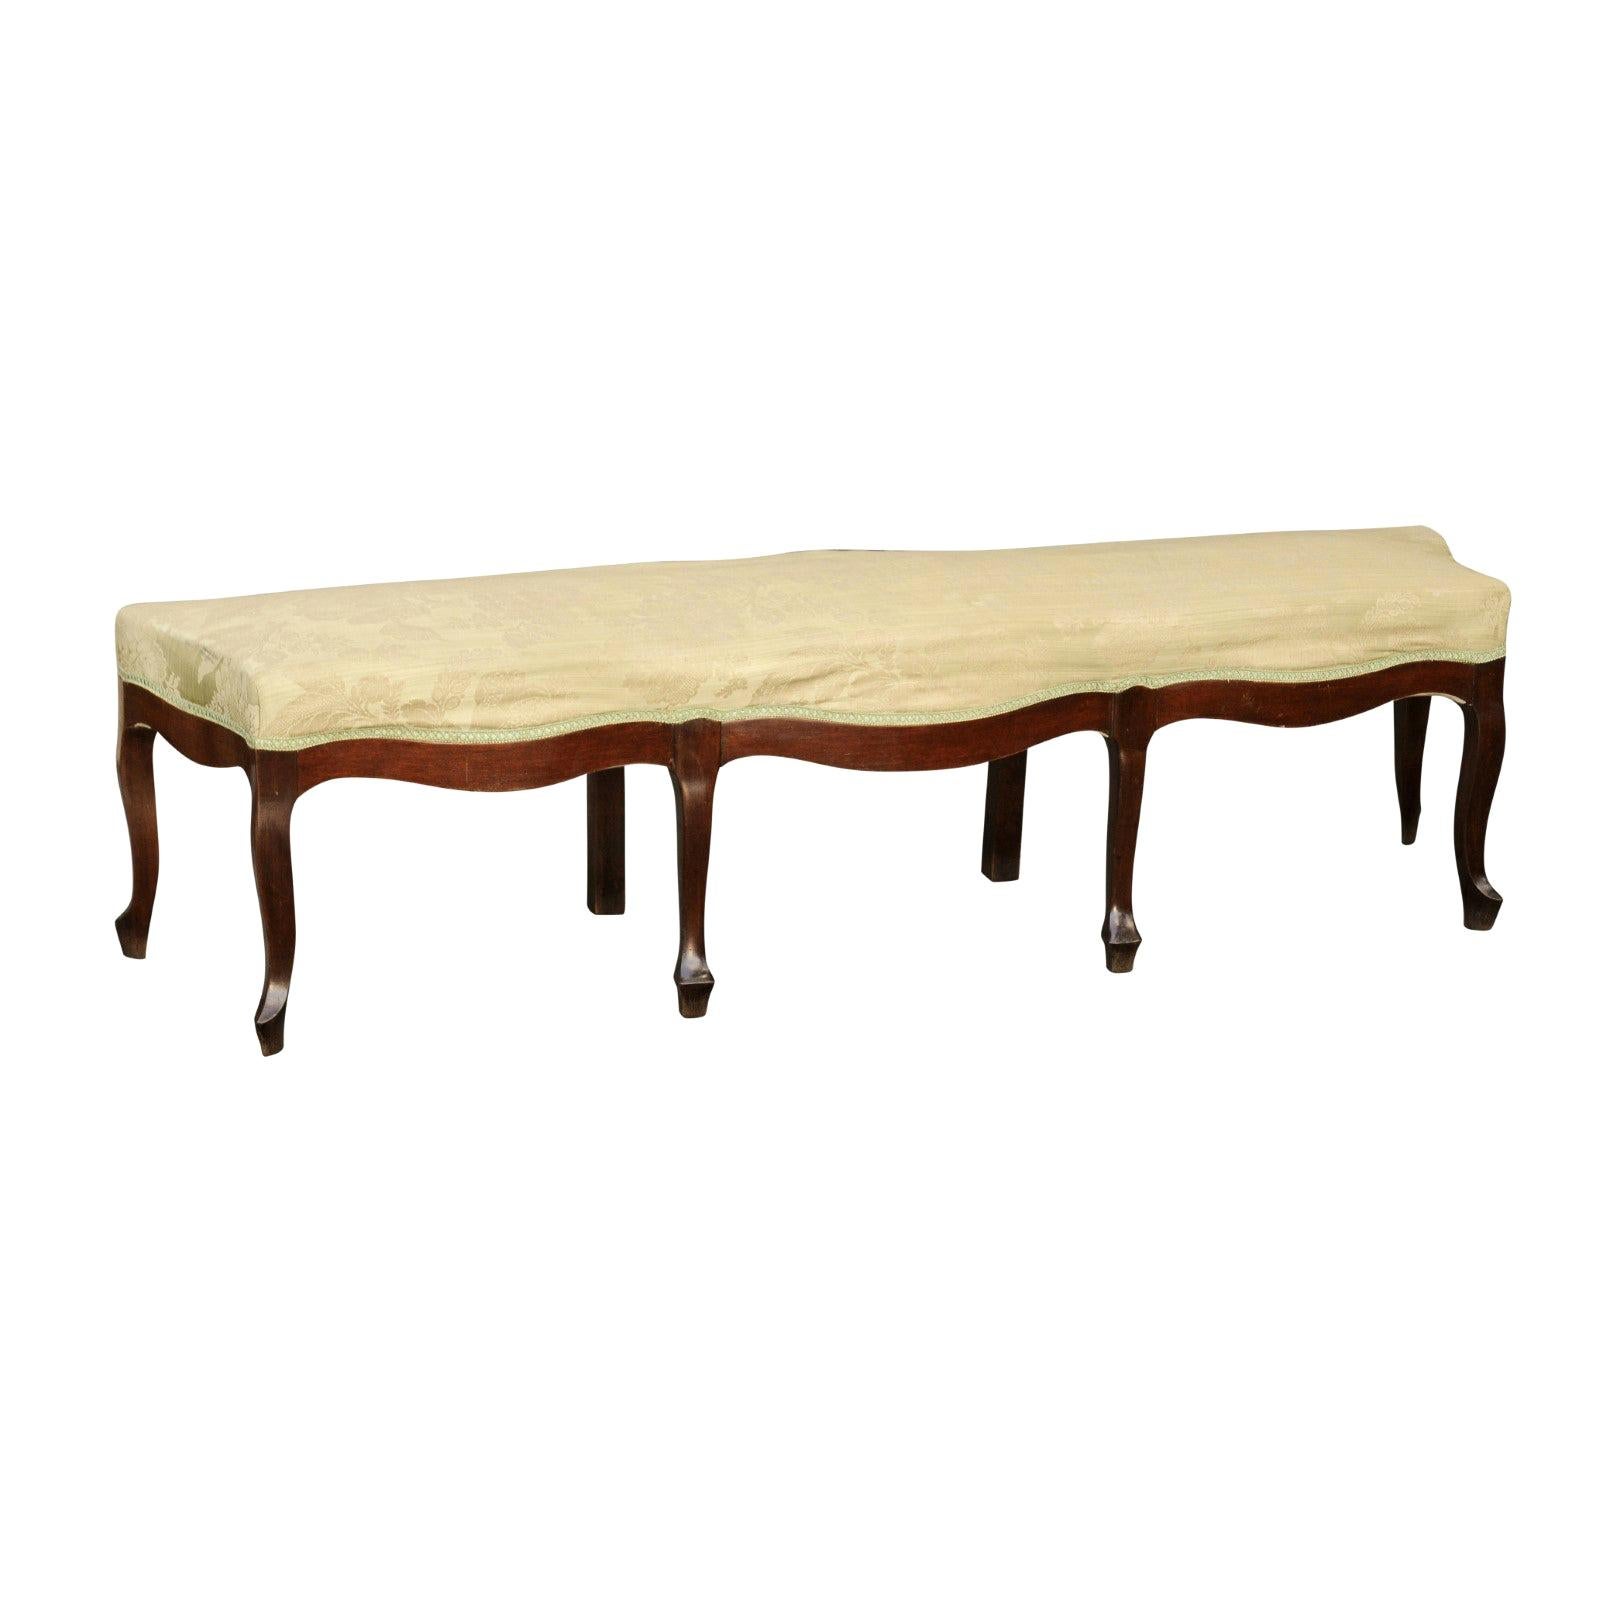 French Louis XV Style 1900s Walnut Bench with Cabriole Legs and Floral Fabric